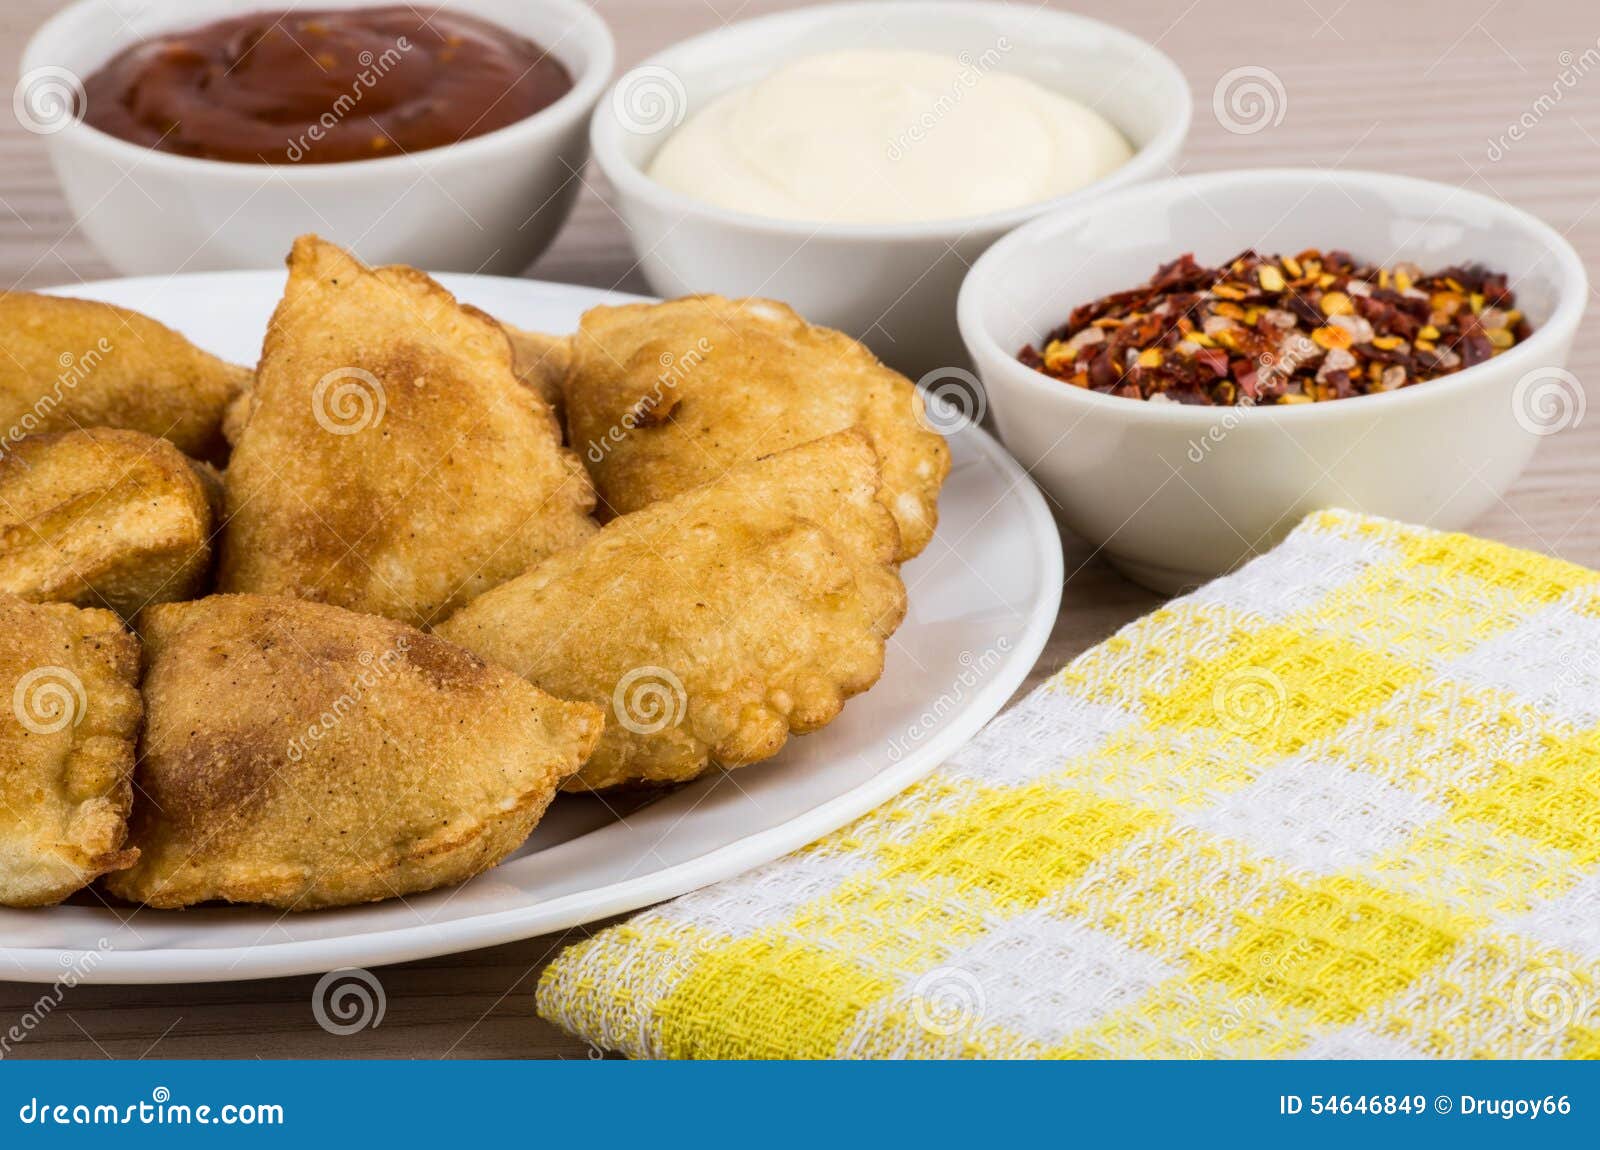 Small Pasties Closeup on Wooden Table Stock Image - Image of crockery ...